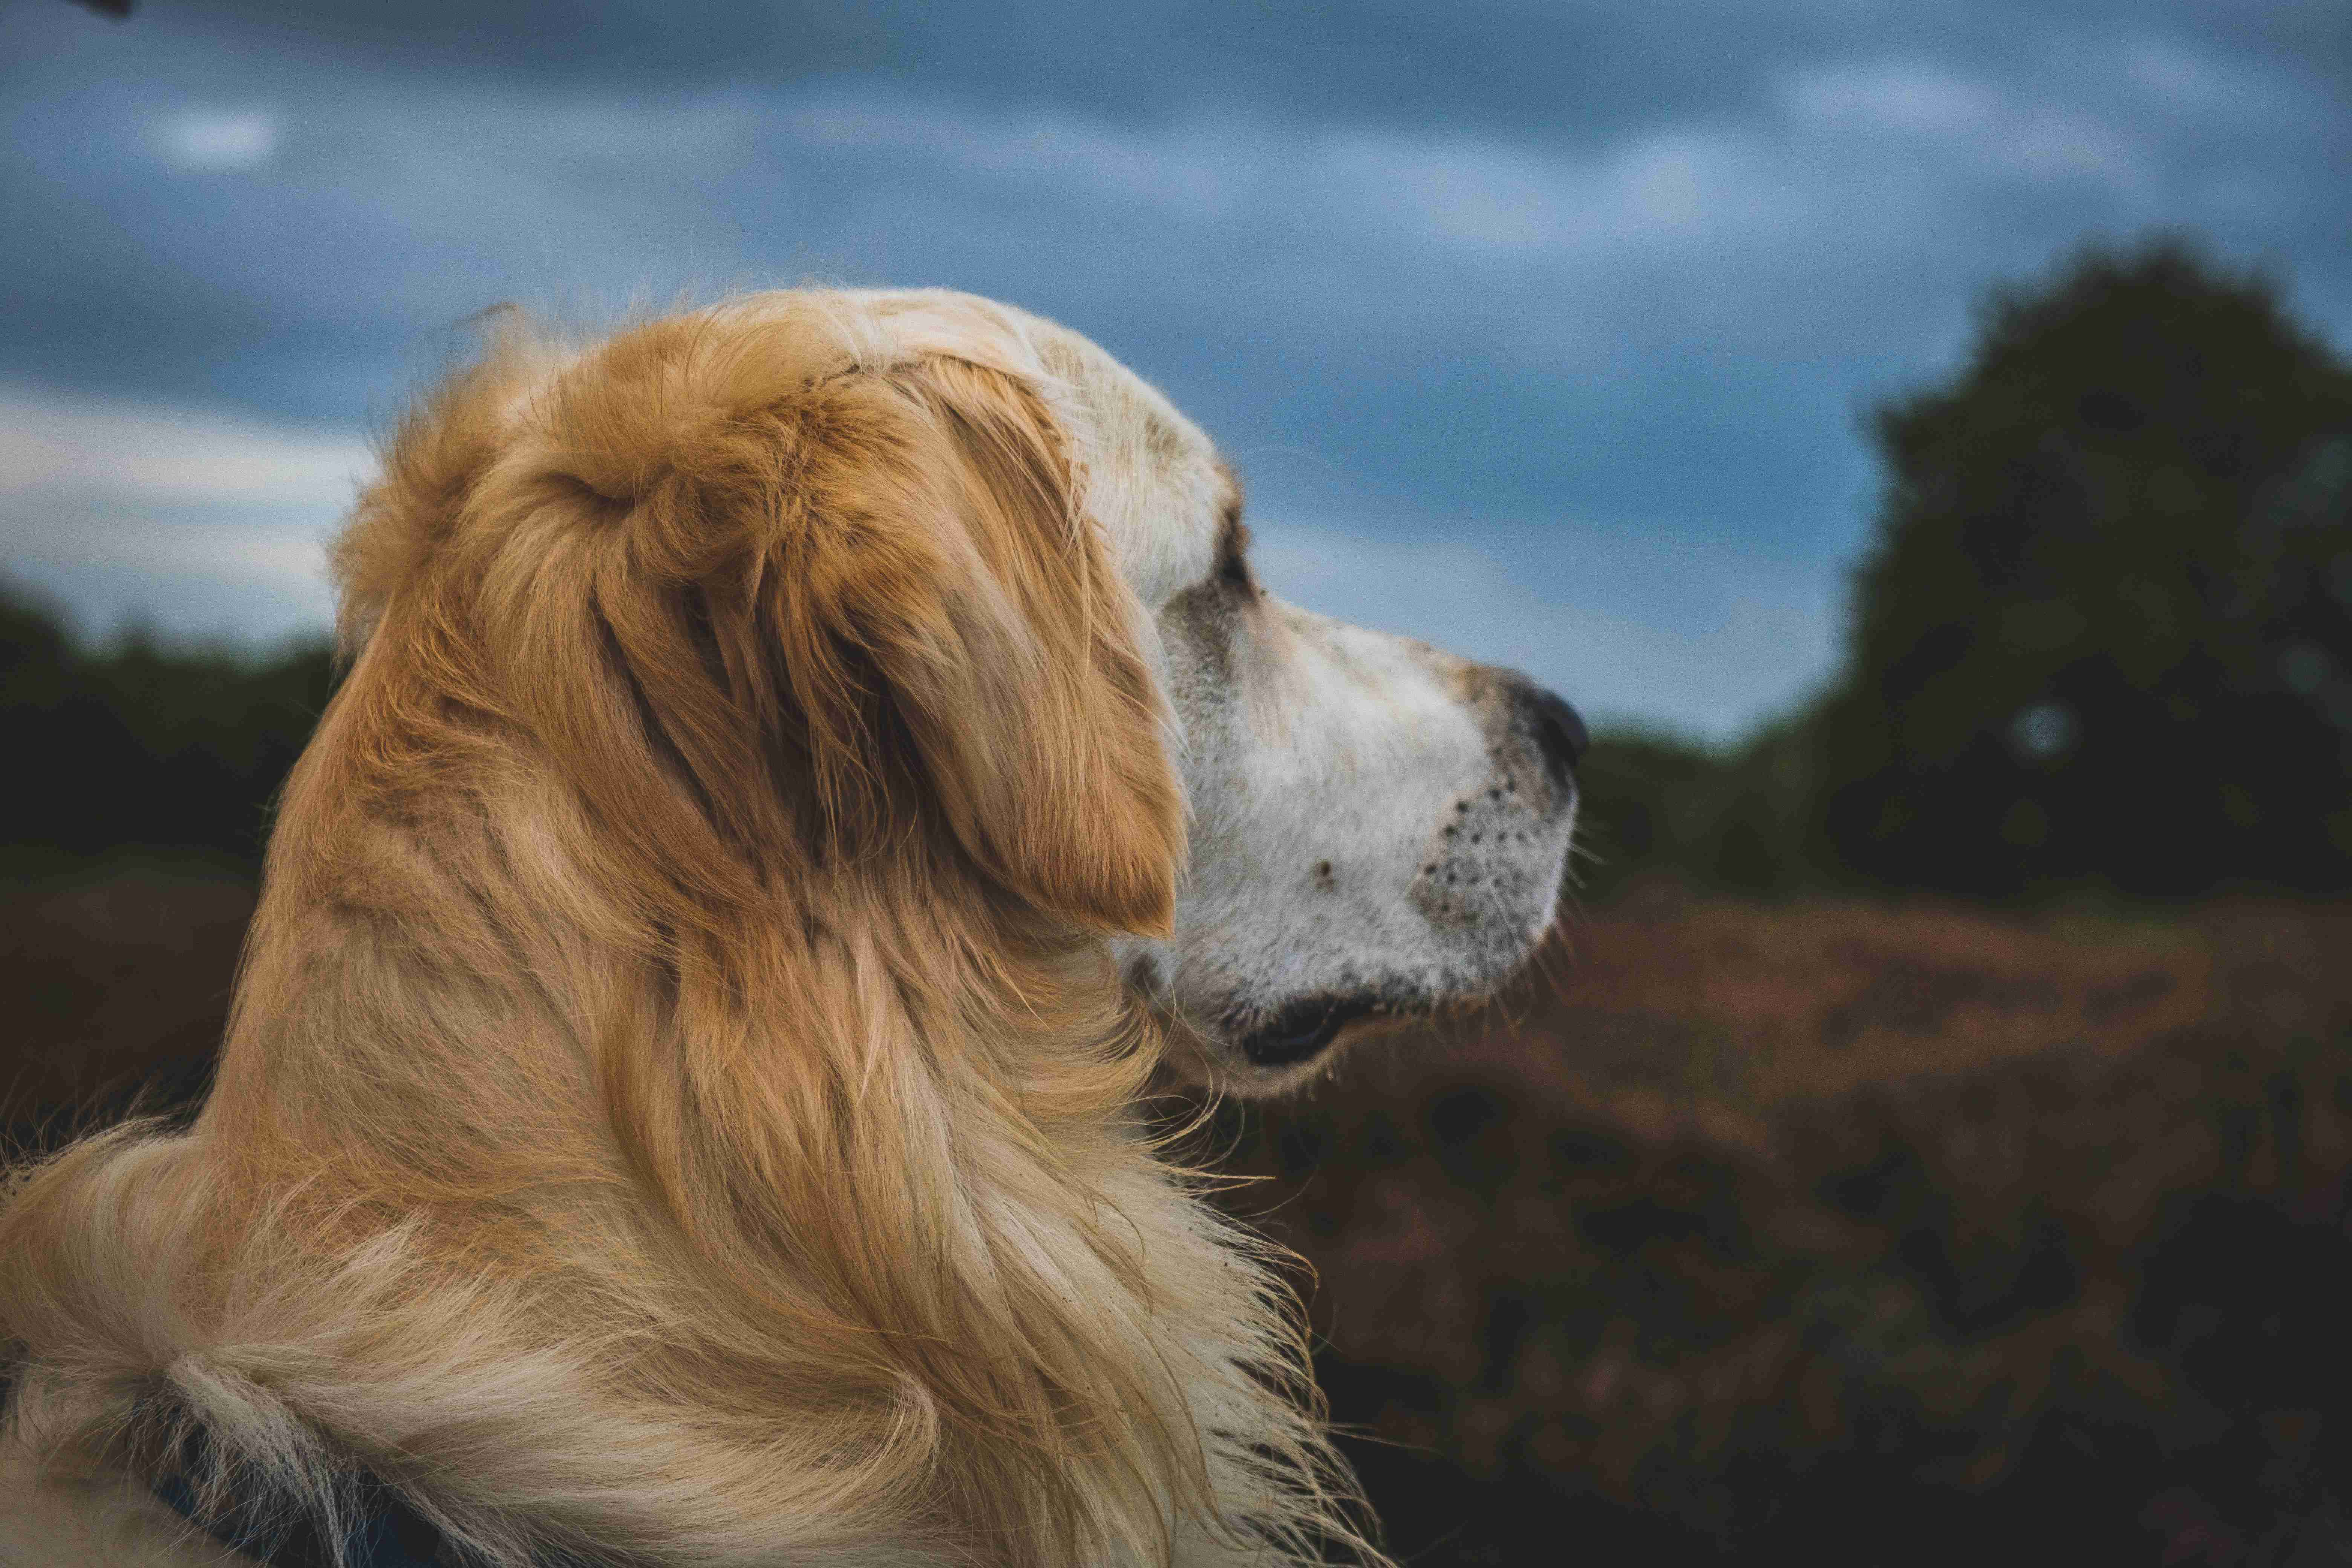 How can I prevent my golden retriever from developing allergies?